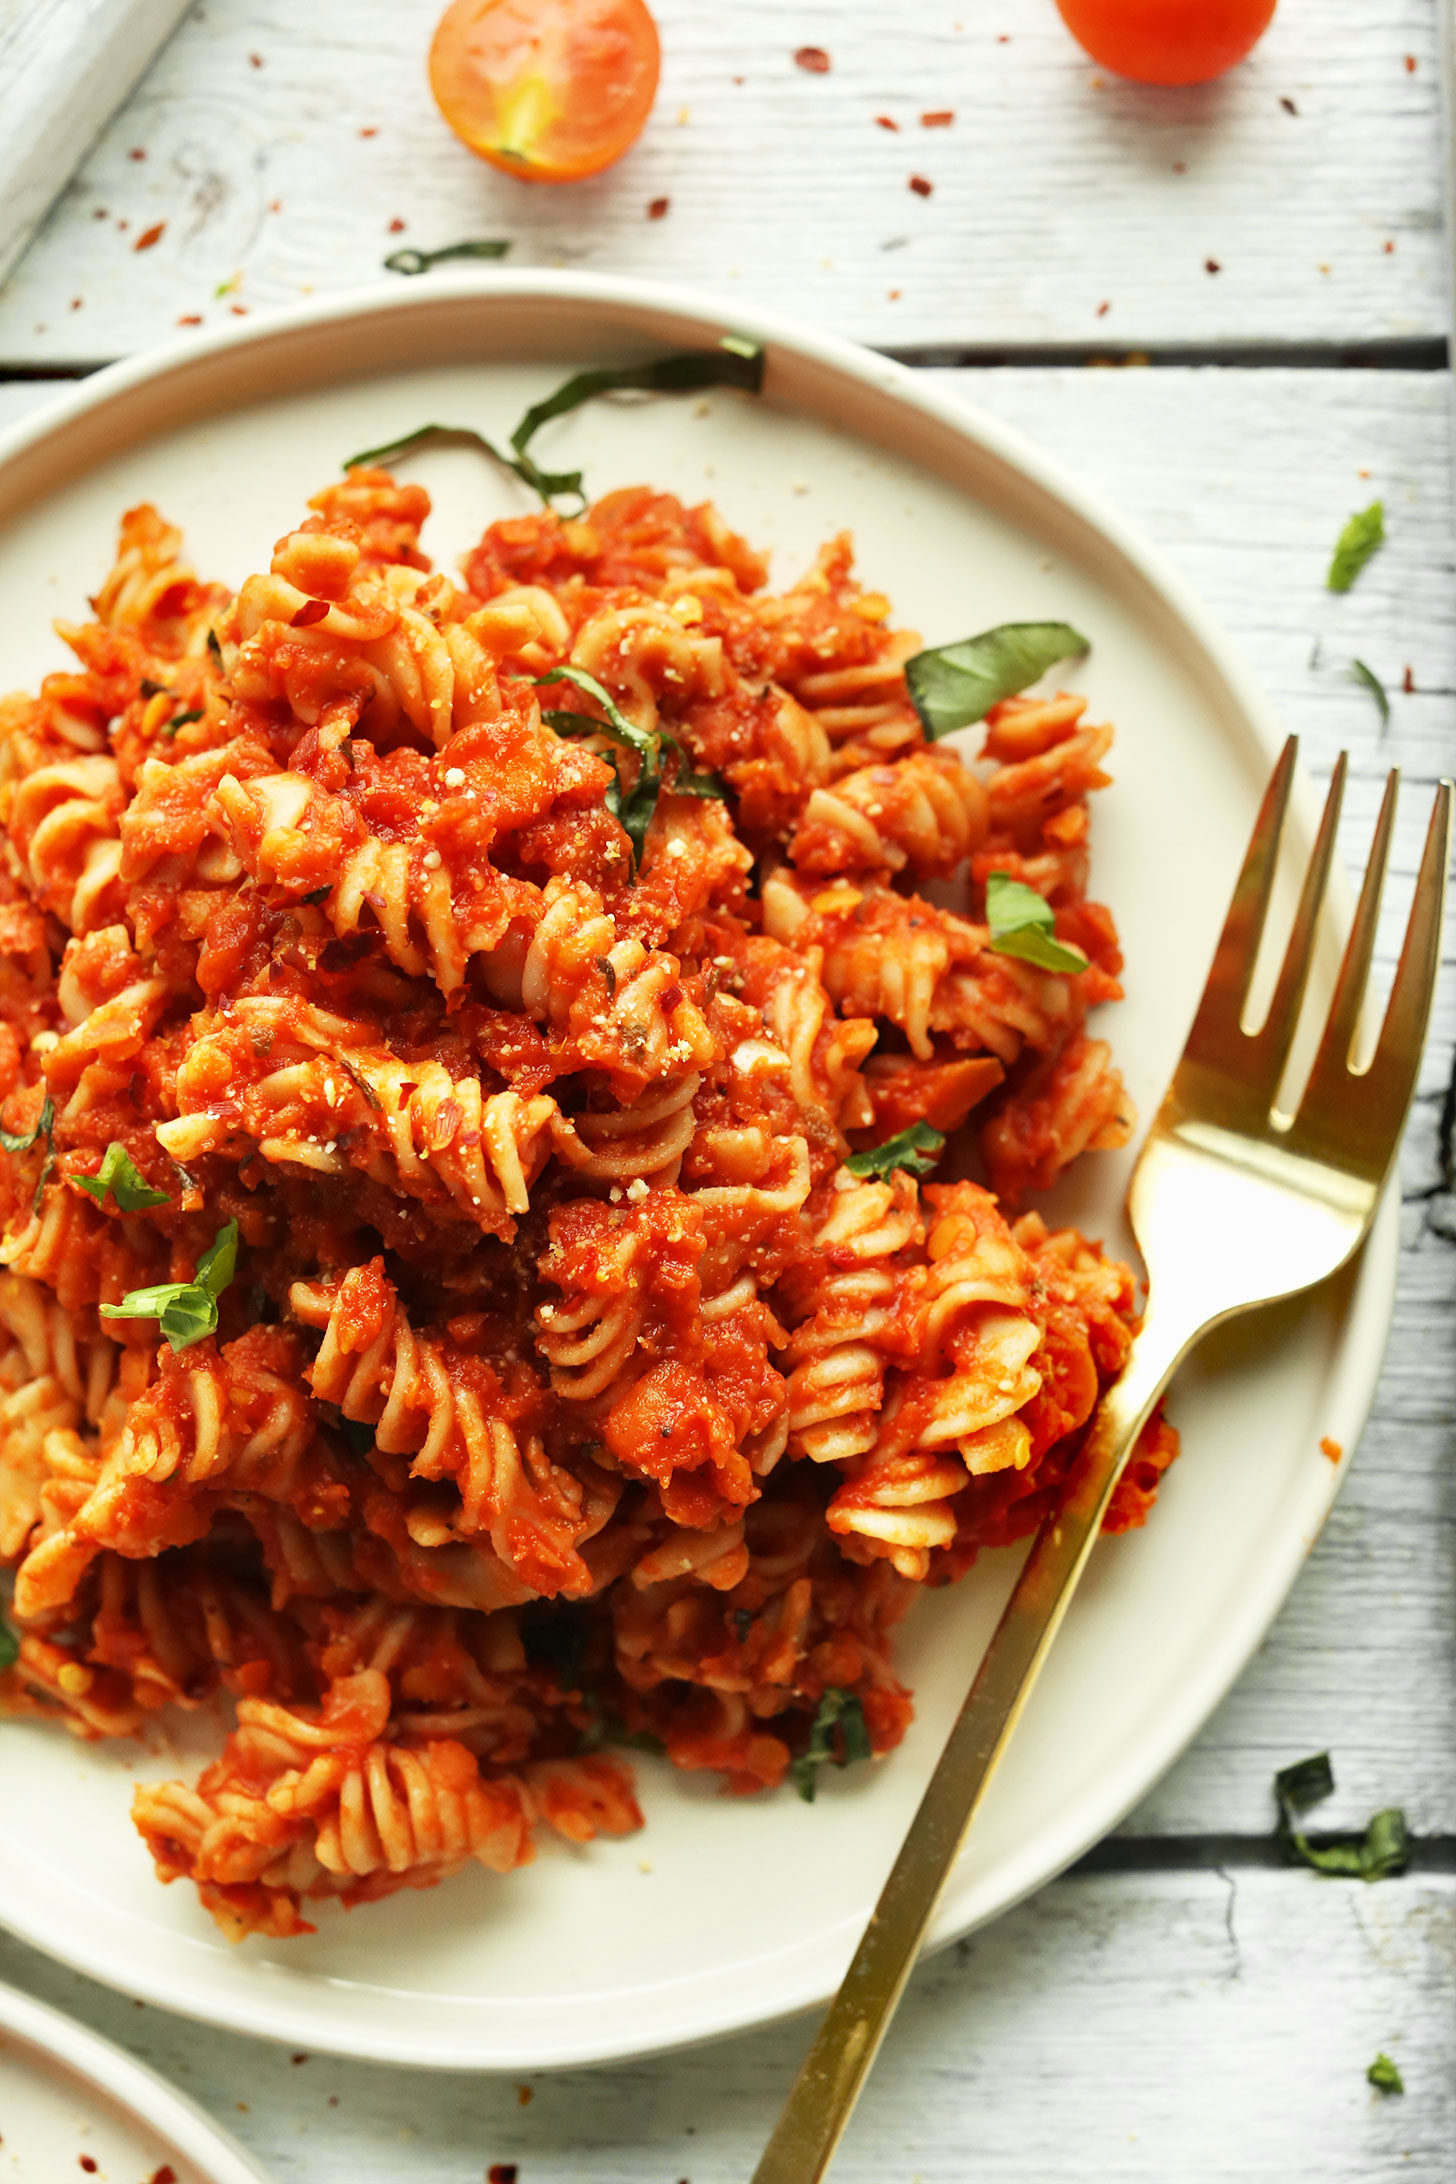 amazing-spicy-red-pasta-with-lentils-and-gf-pasta-vegan-plantbased-glutenfree-recipe-healthy-dinner